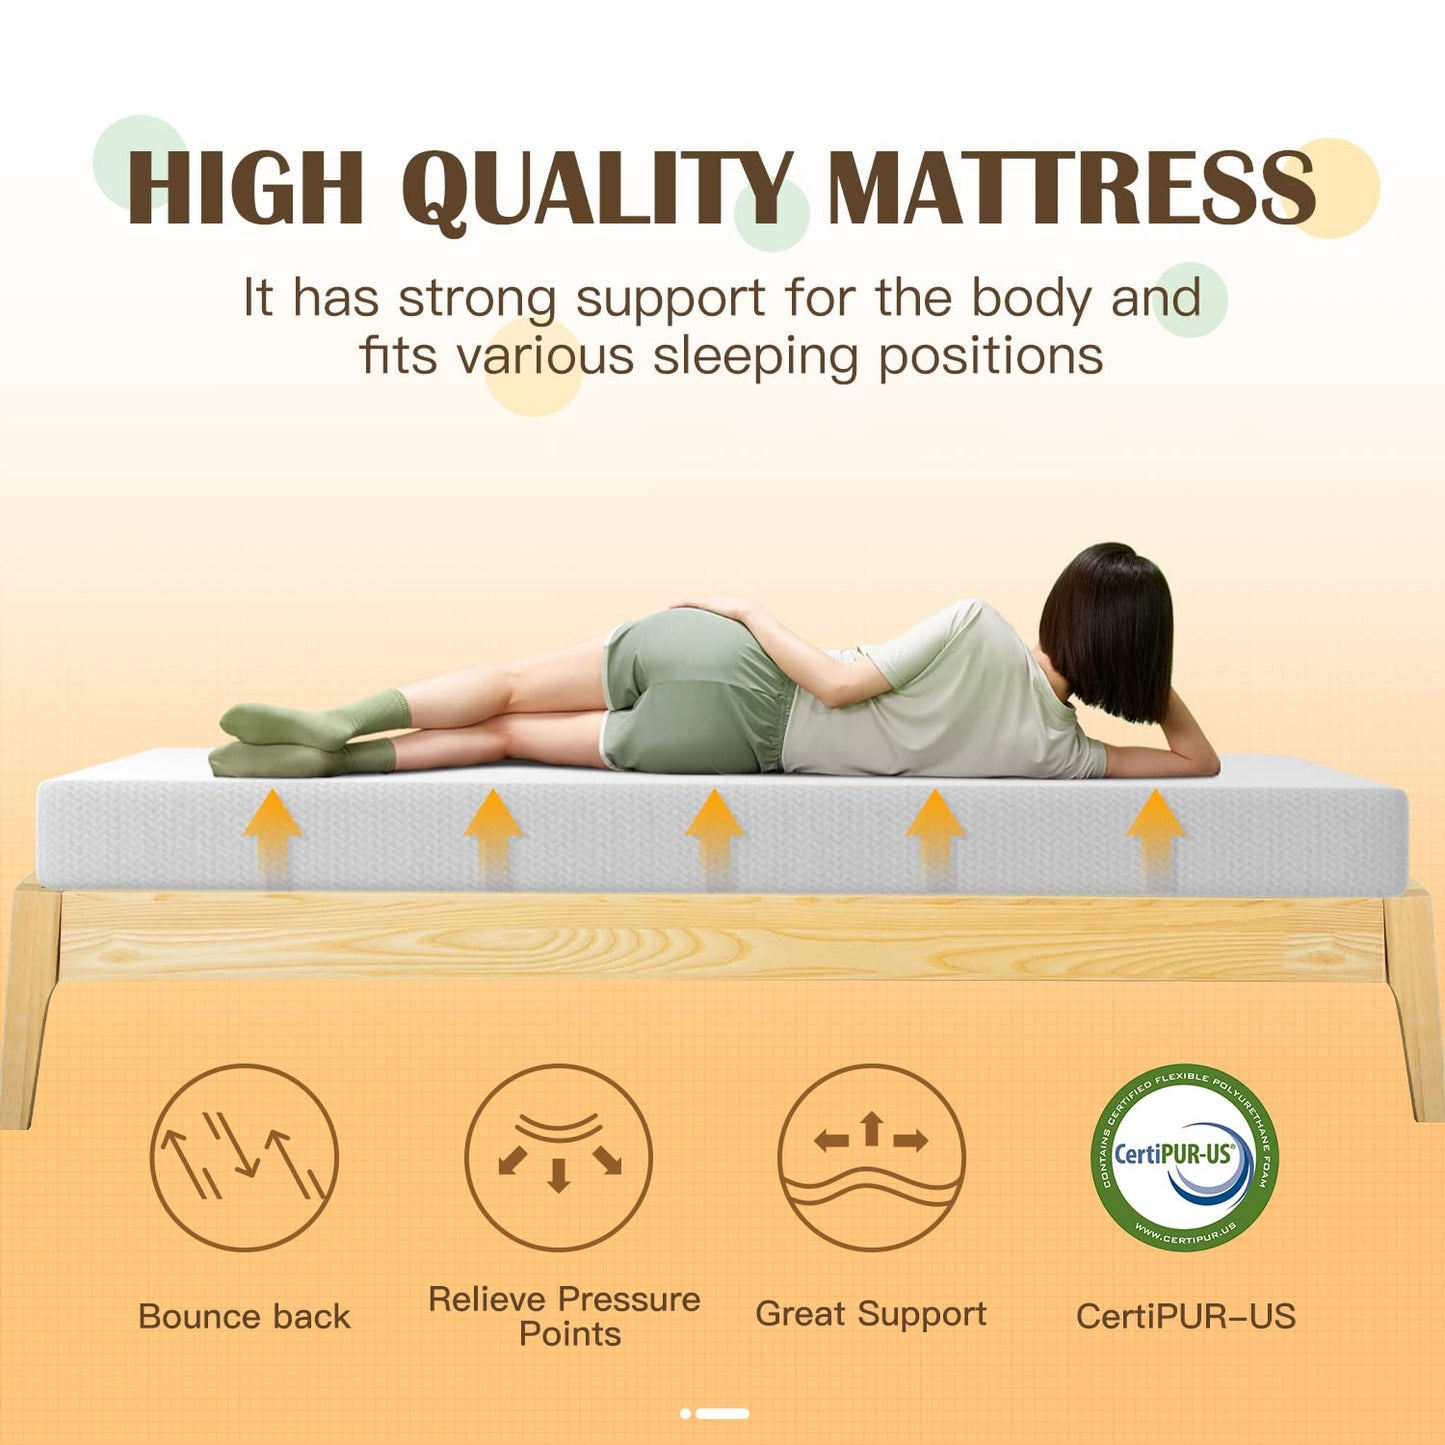 PayLessHere 8 inch Memory Foam Mattress Cooling Gel Green Tea Infused Mattress,Fiberglass Free,CertiPUR-US Certified,Breathable Bed Mattress for Cooler Sleep Supportive,White Twin